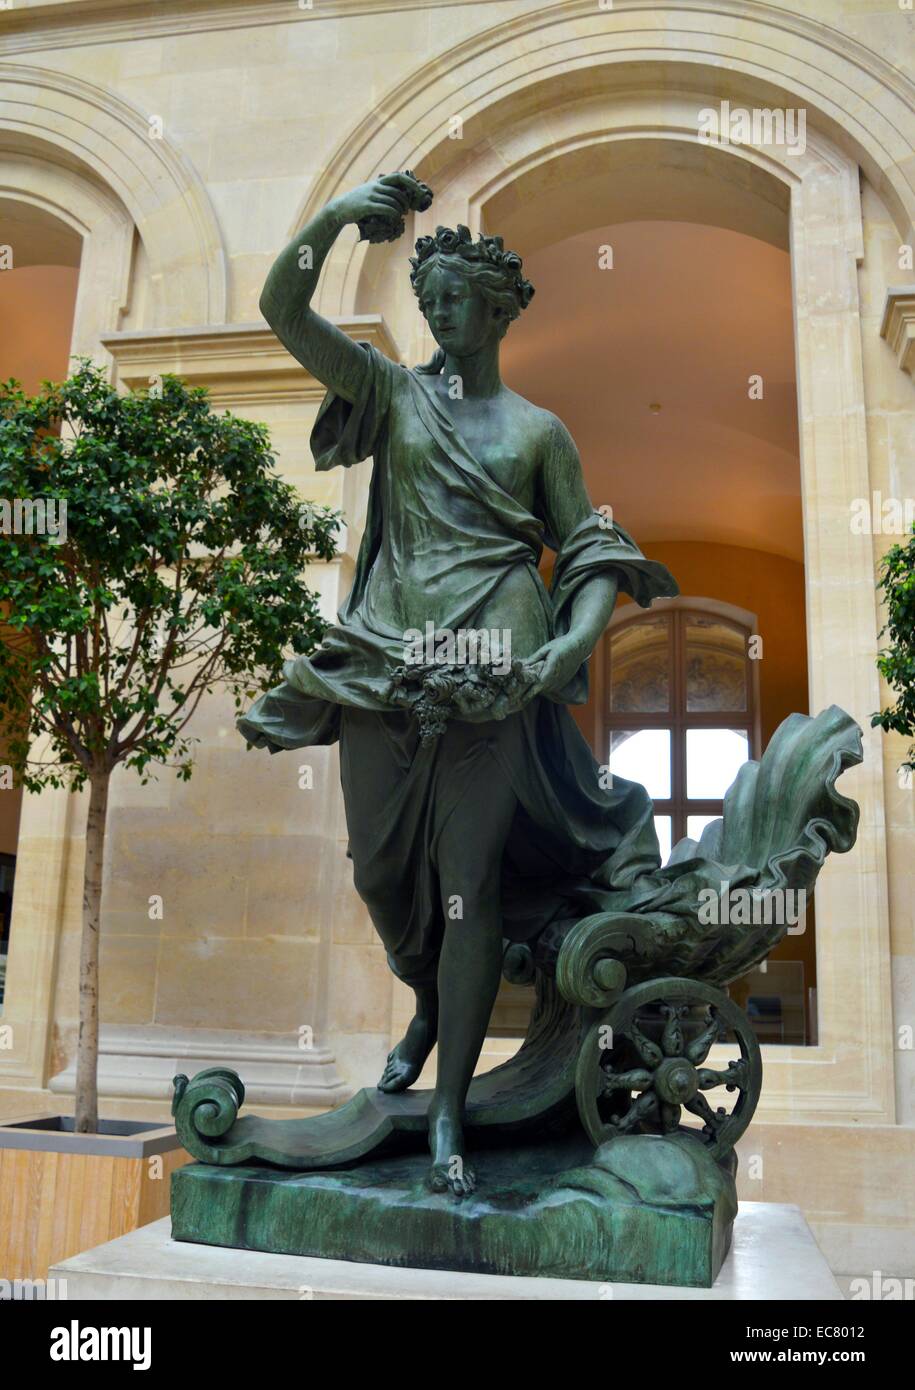 Bronze statue of L'Aurore (1693) by Philippe Magnier (1647-1715) was a French sculptor in the service of the Sun King court painter Charles Le Brun. Dated 17th century. Stock Photo